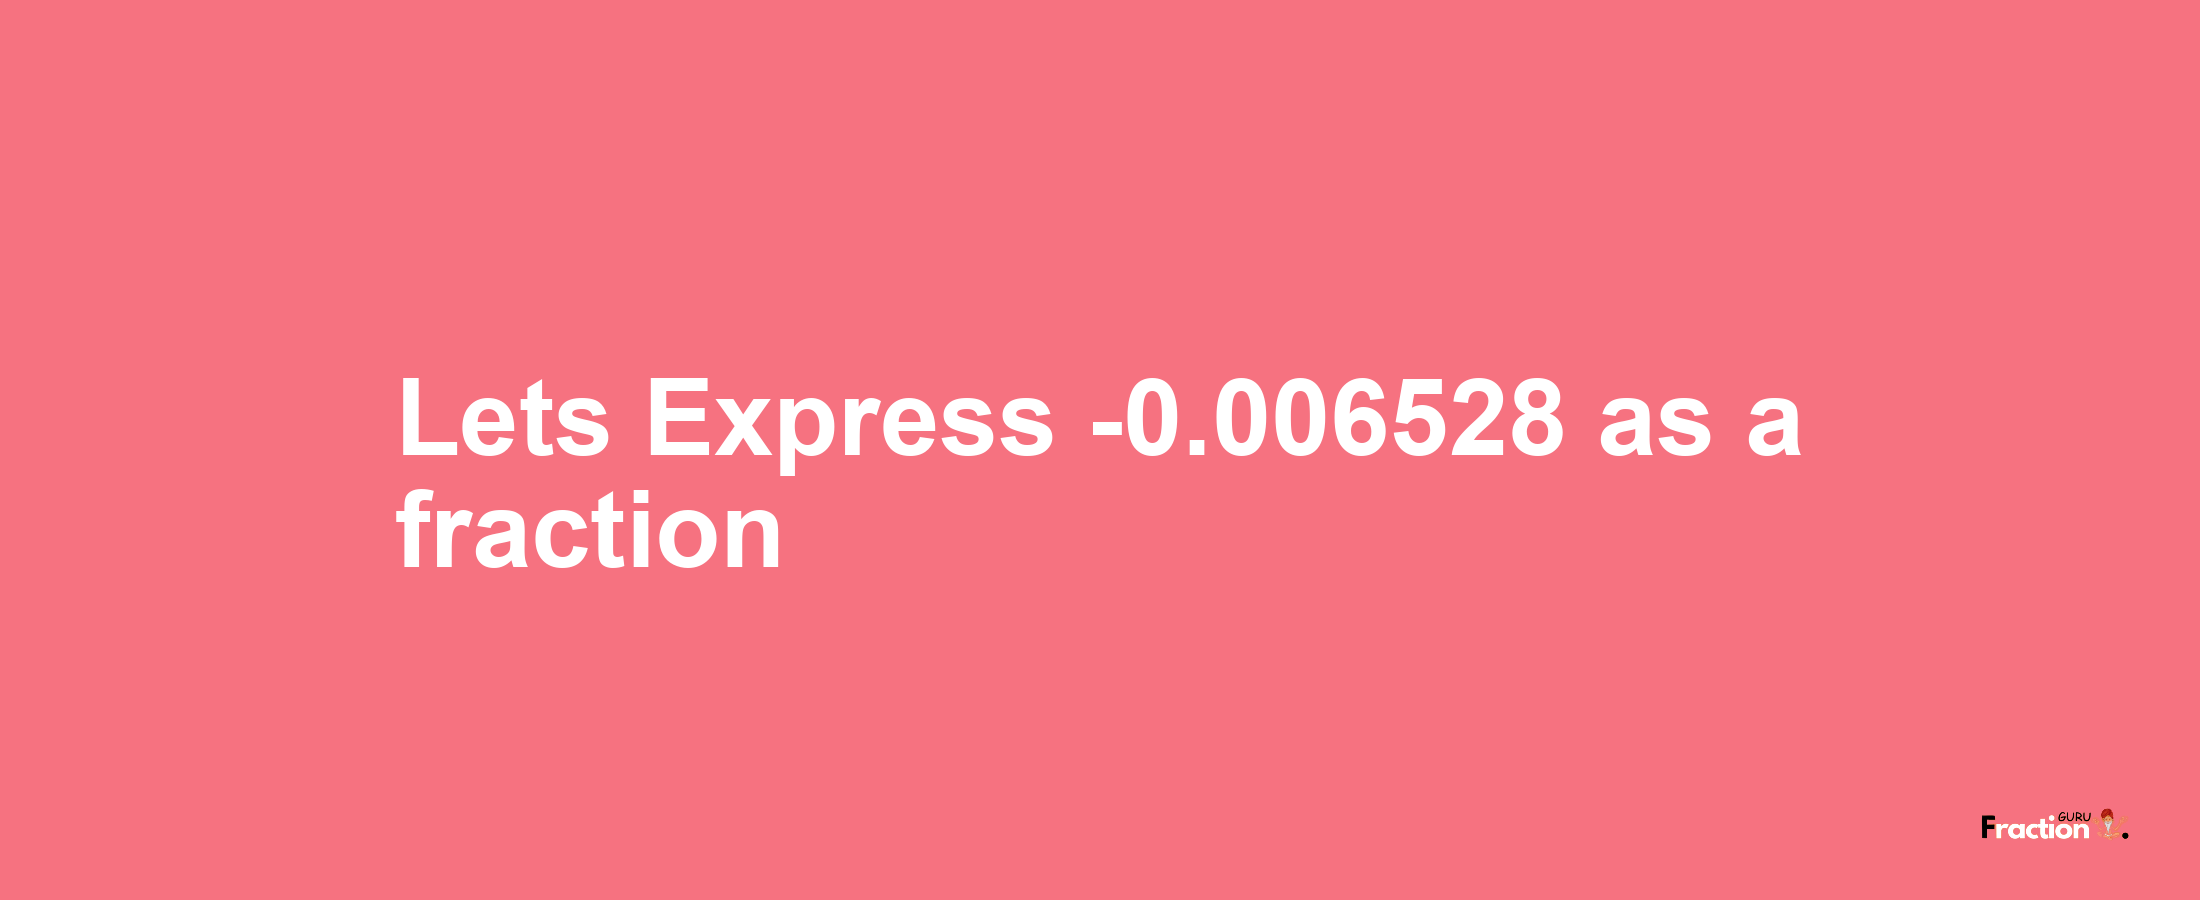 Lets Express -0.006528 as afraction